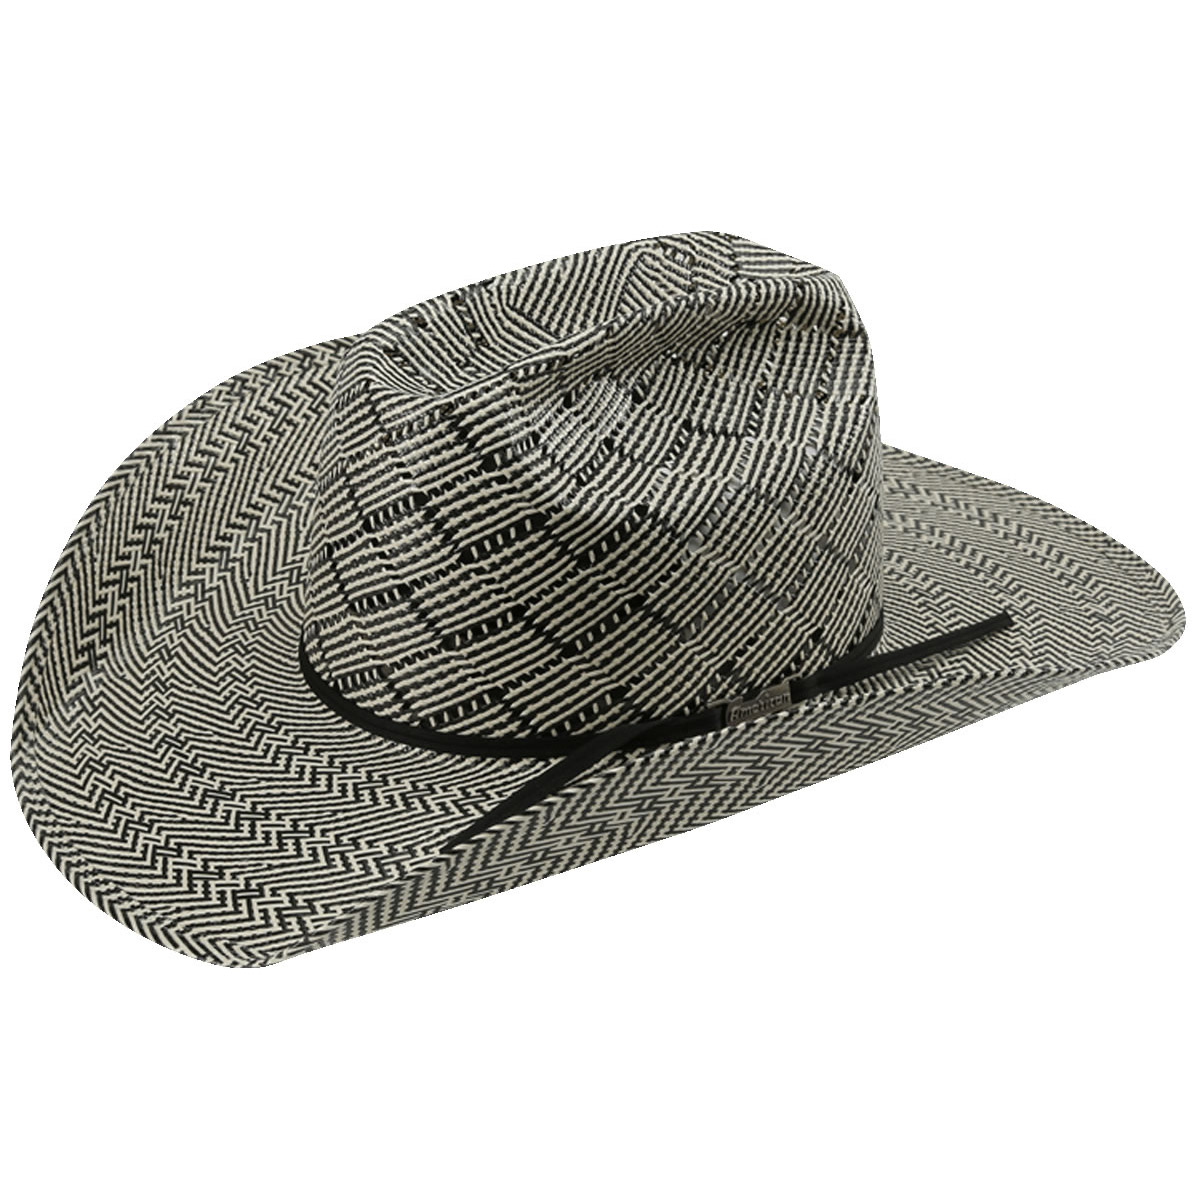 Pungo Ridge - American Hat Co 20★ 5070 Patchwork Crossbred Vented Straw ...